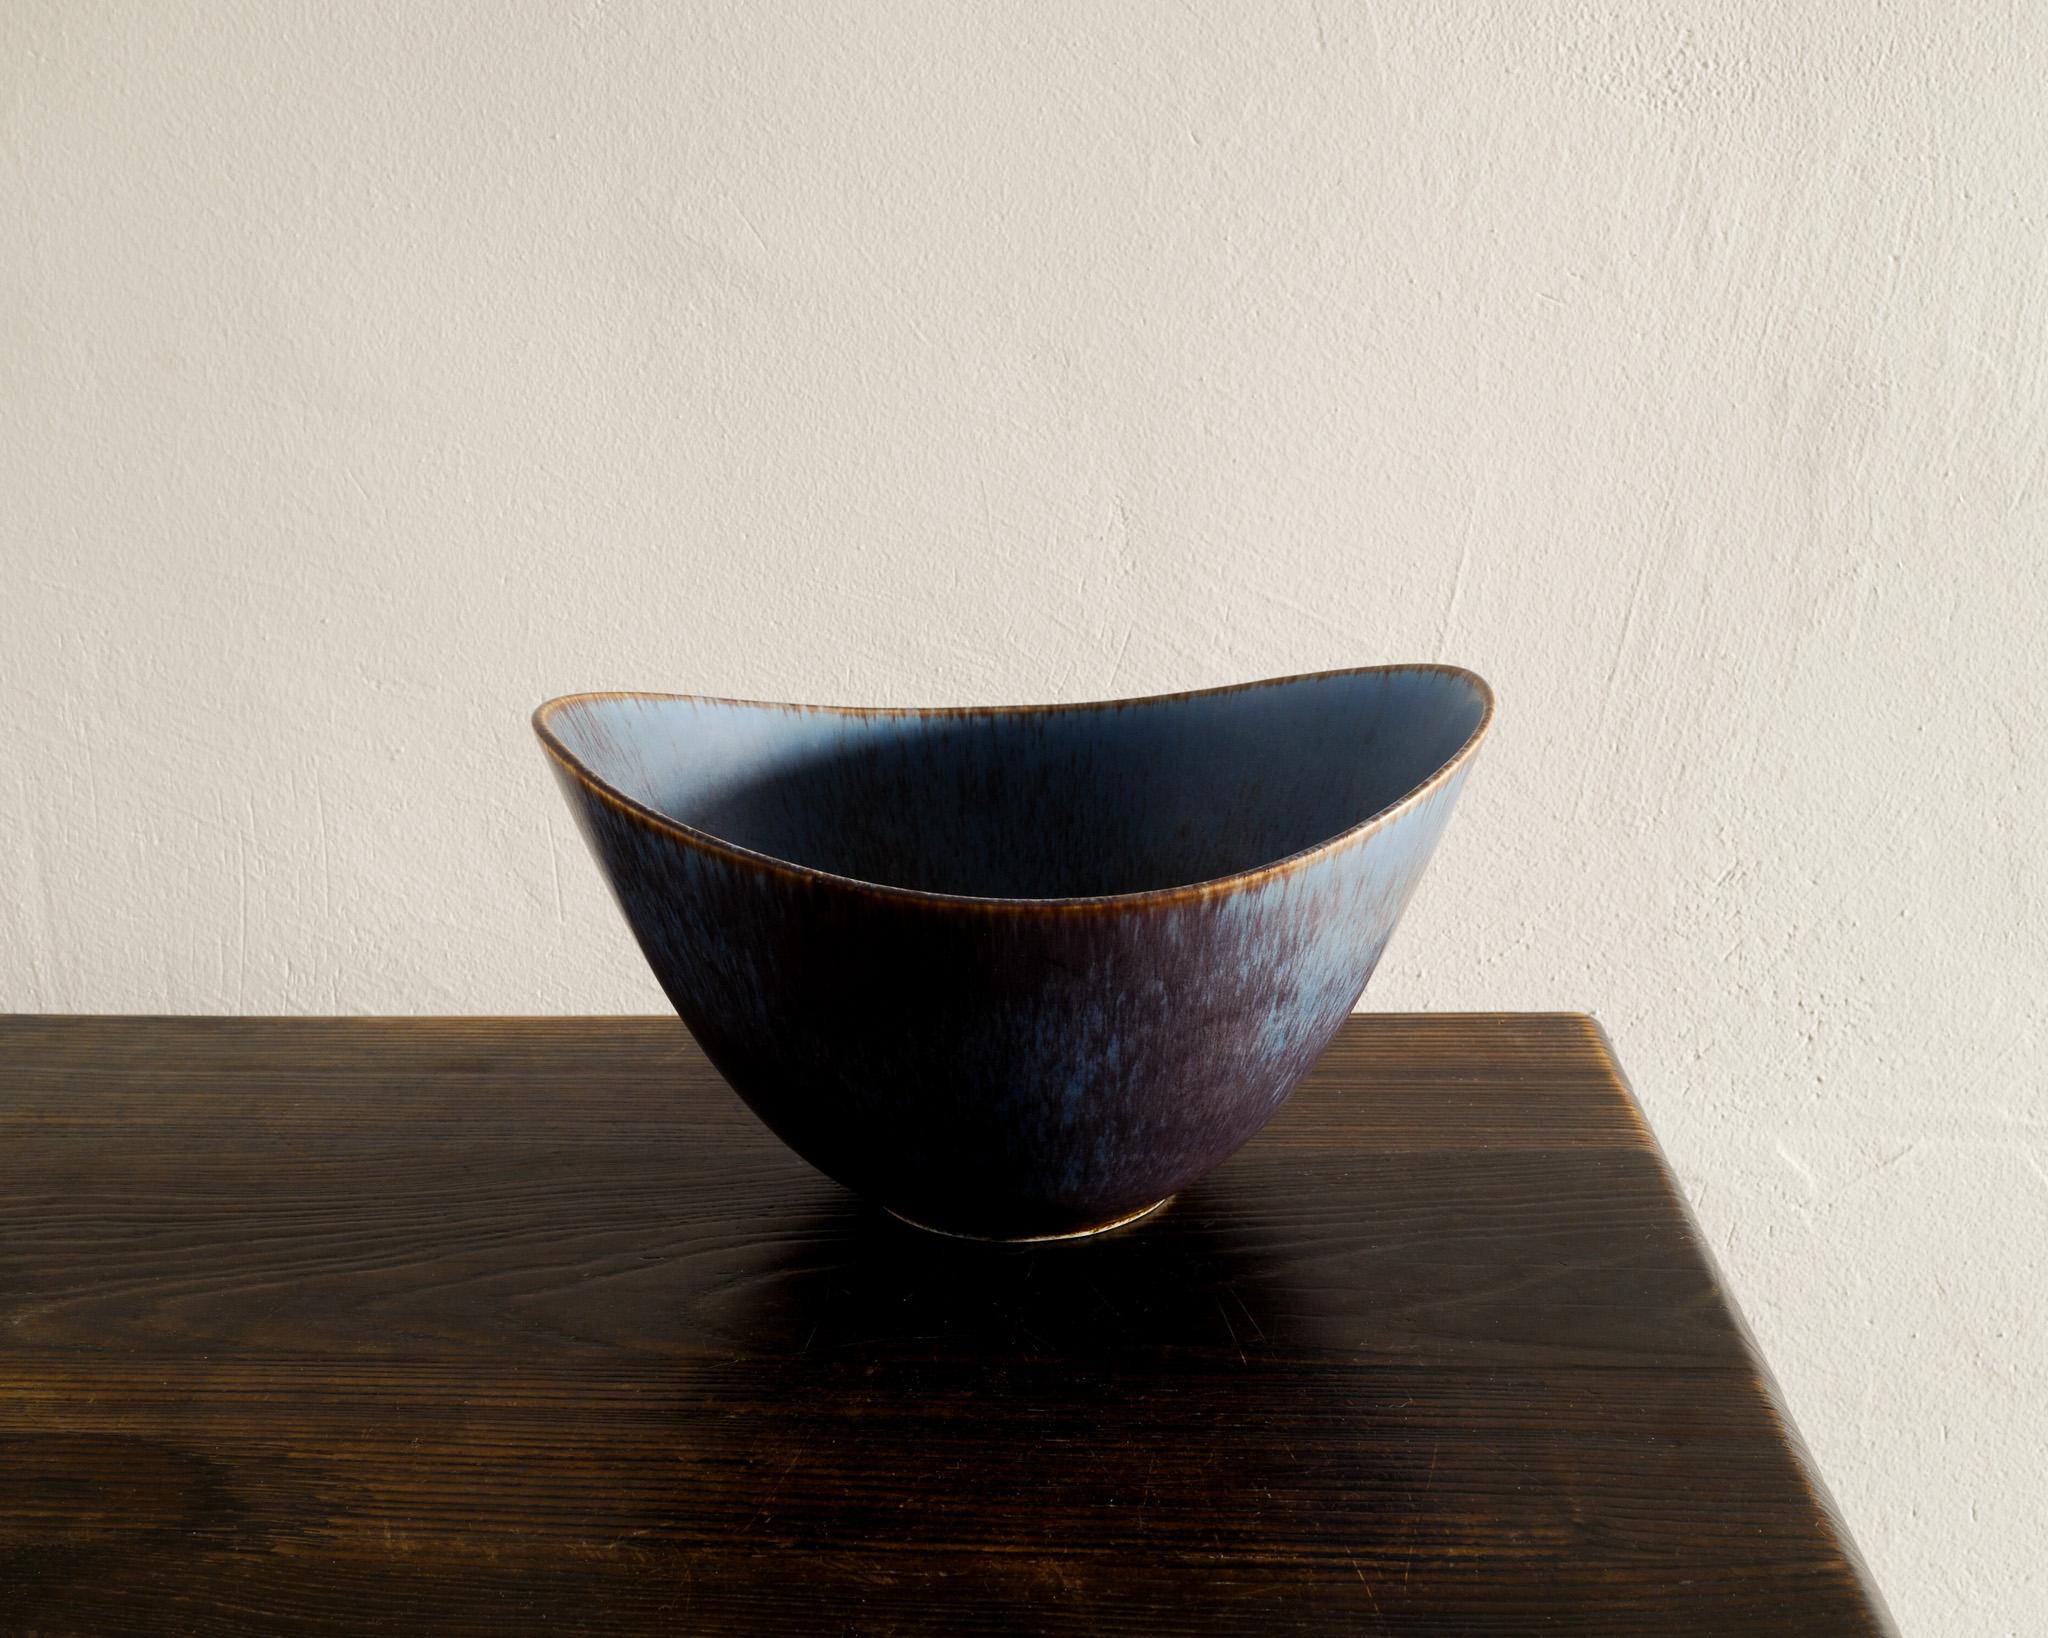 Rare and large ceramic / stoneware bowl in blue brown glaze by Gunnar Nylund produced by Rörstrand Sweden 1950s. In good condition. Signed 